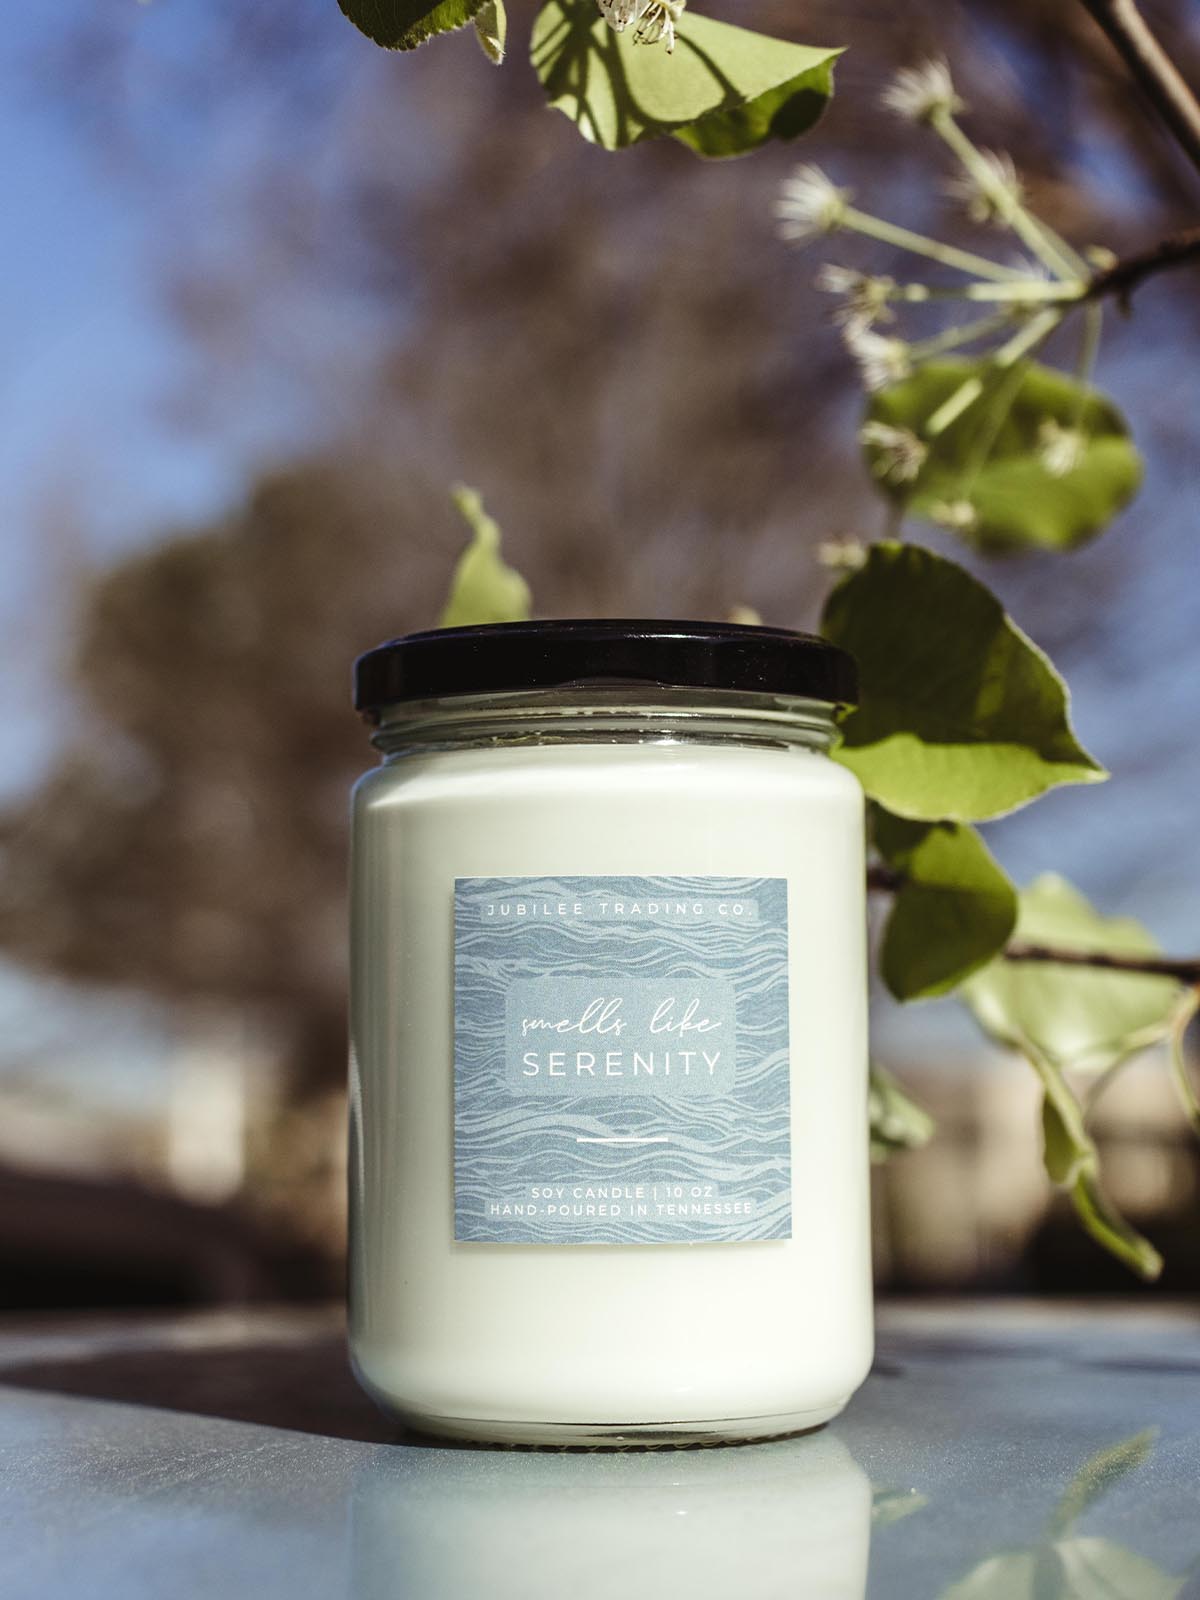 Smells Like Serenity candle on a blue surface with blue sky and greenery in the background. 